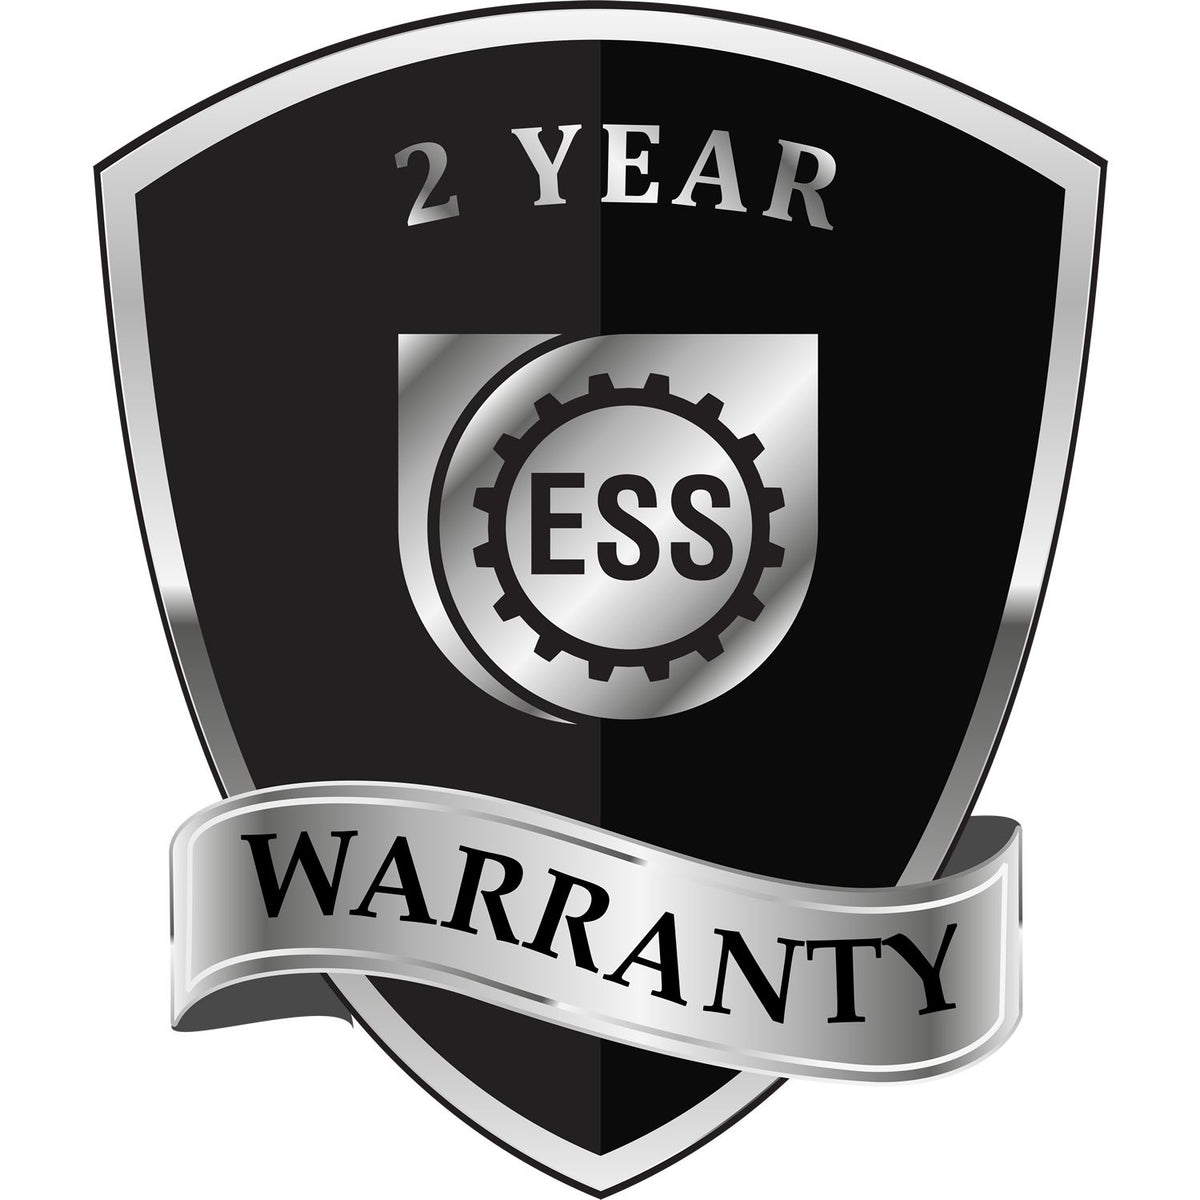 A badge or emblem showing a warranty icon for the State of South Dakota Extended Long Reach Engineer Seal